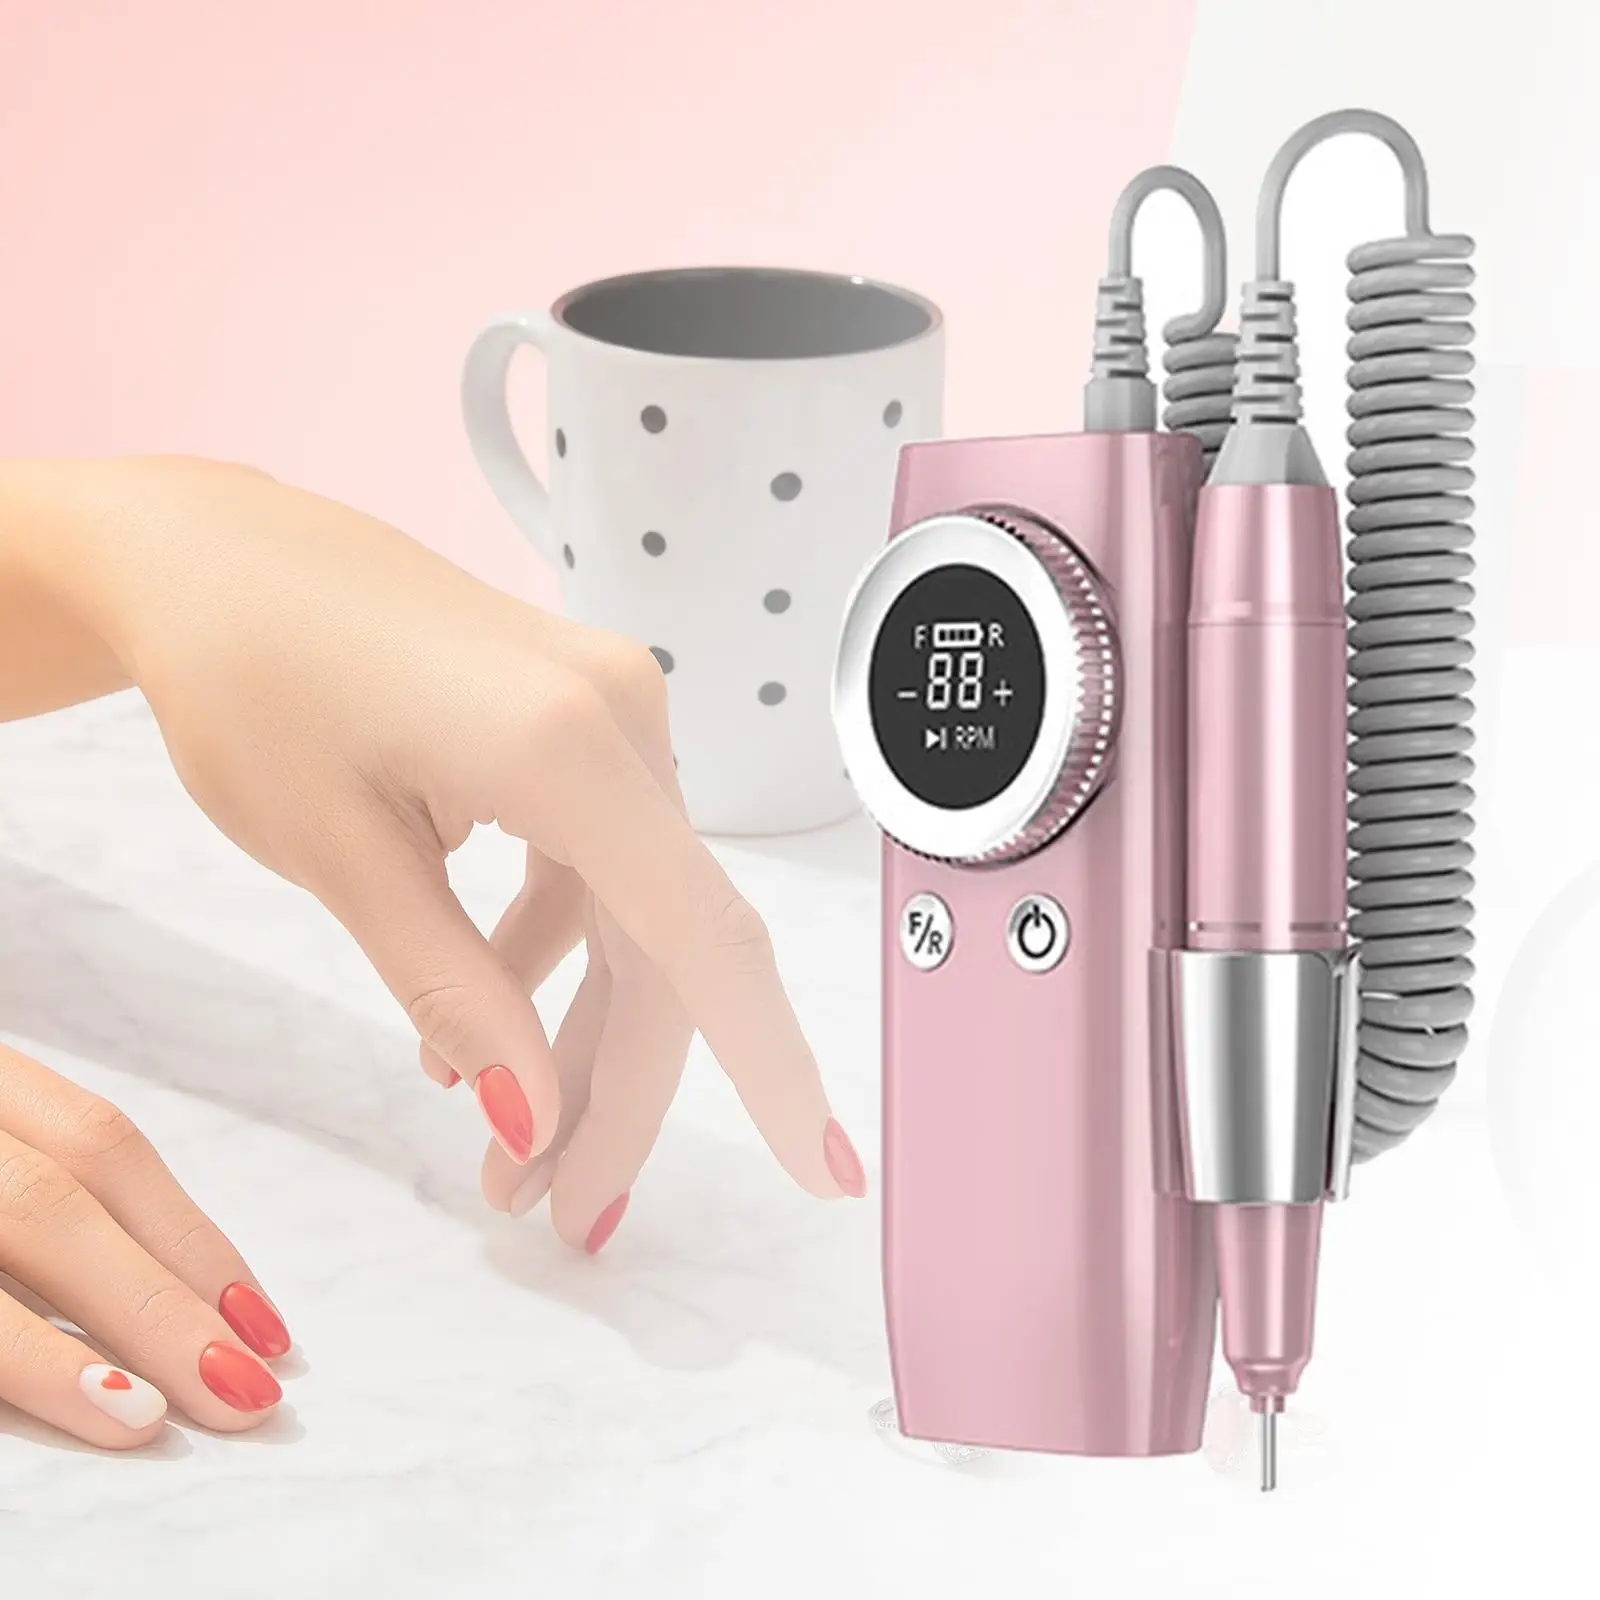 Nail File Machine 45000 RPM 36W for Nails Polishing Rechargeable Salon Home